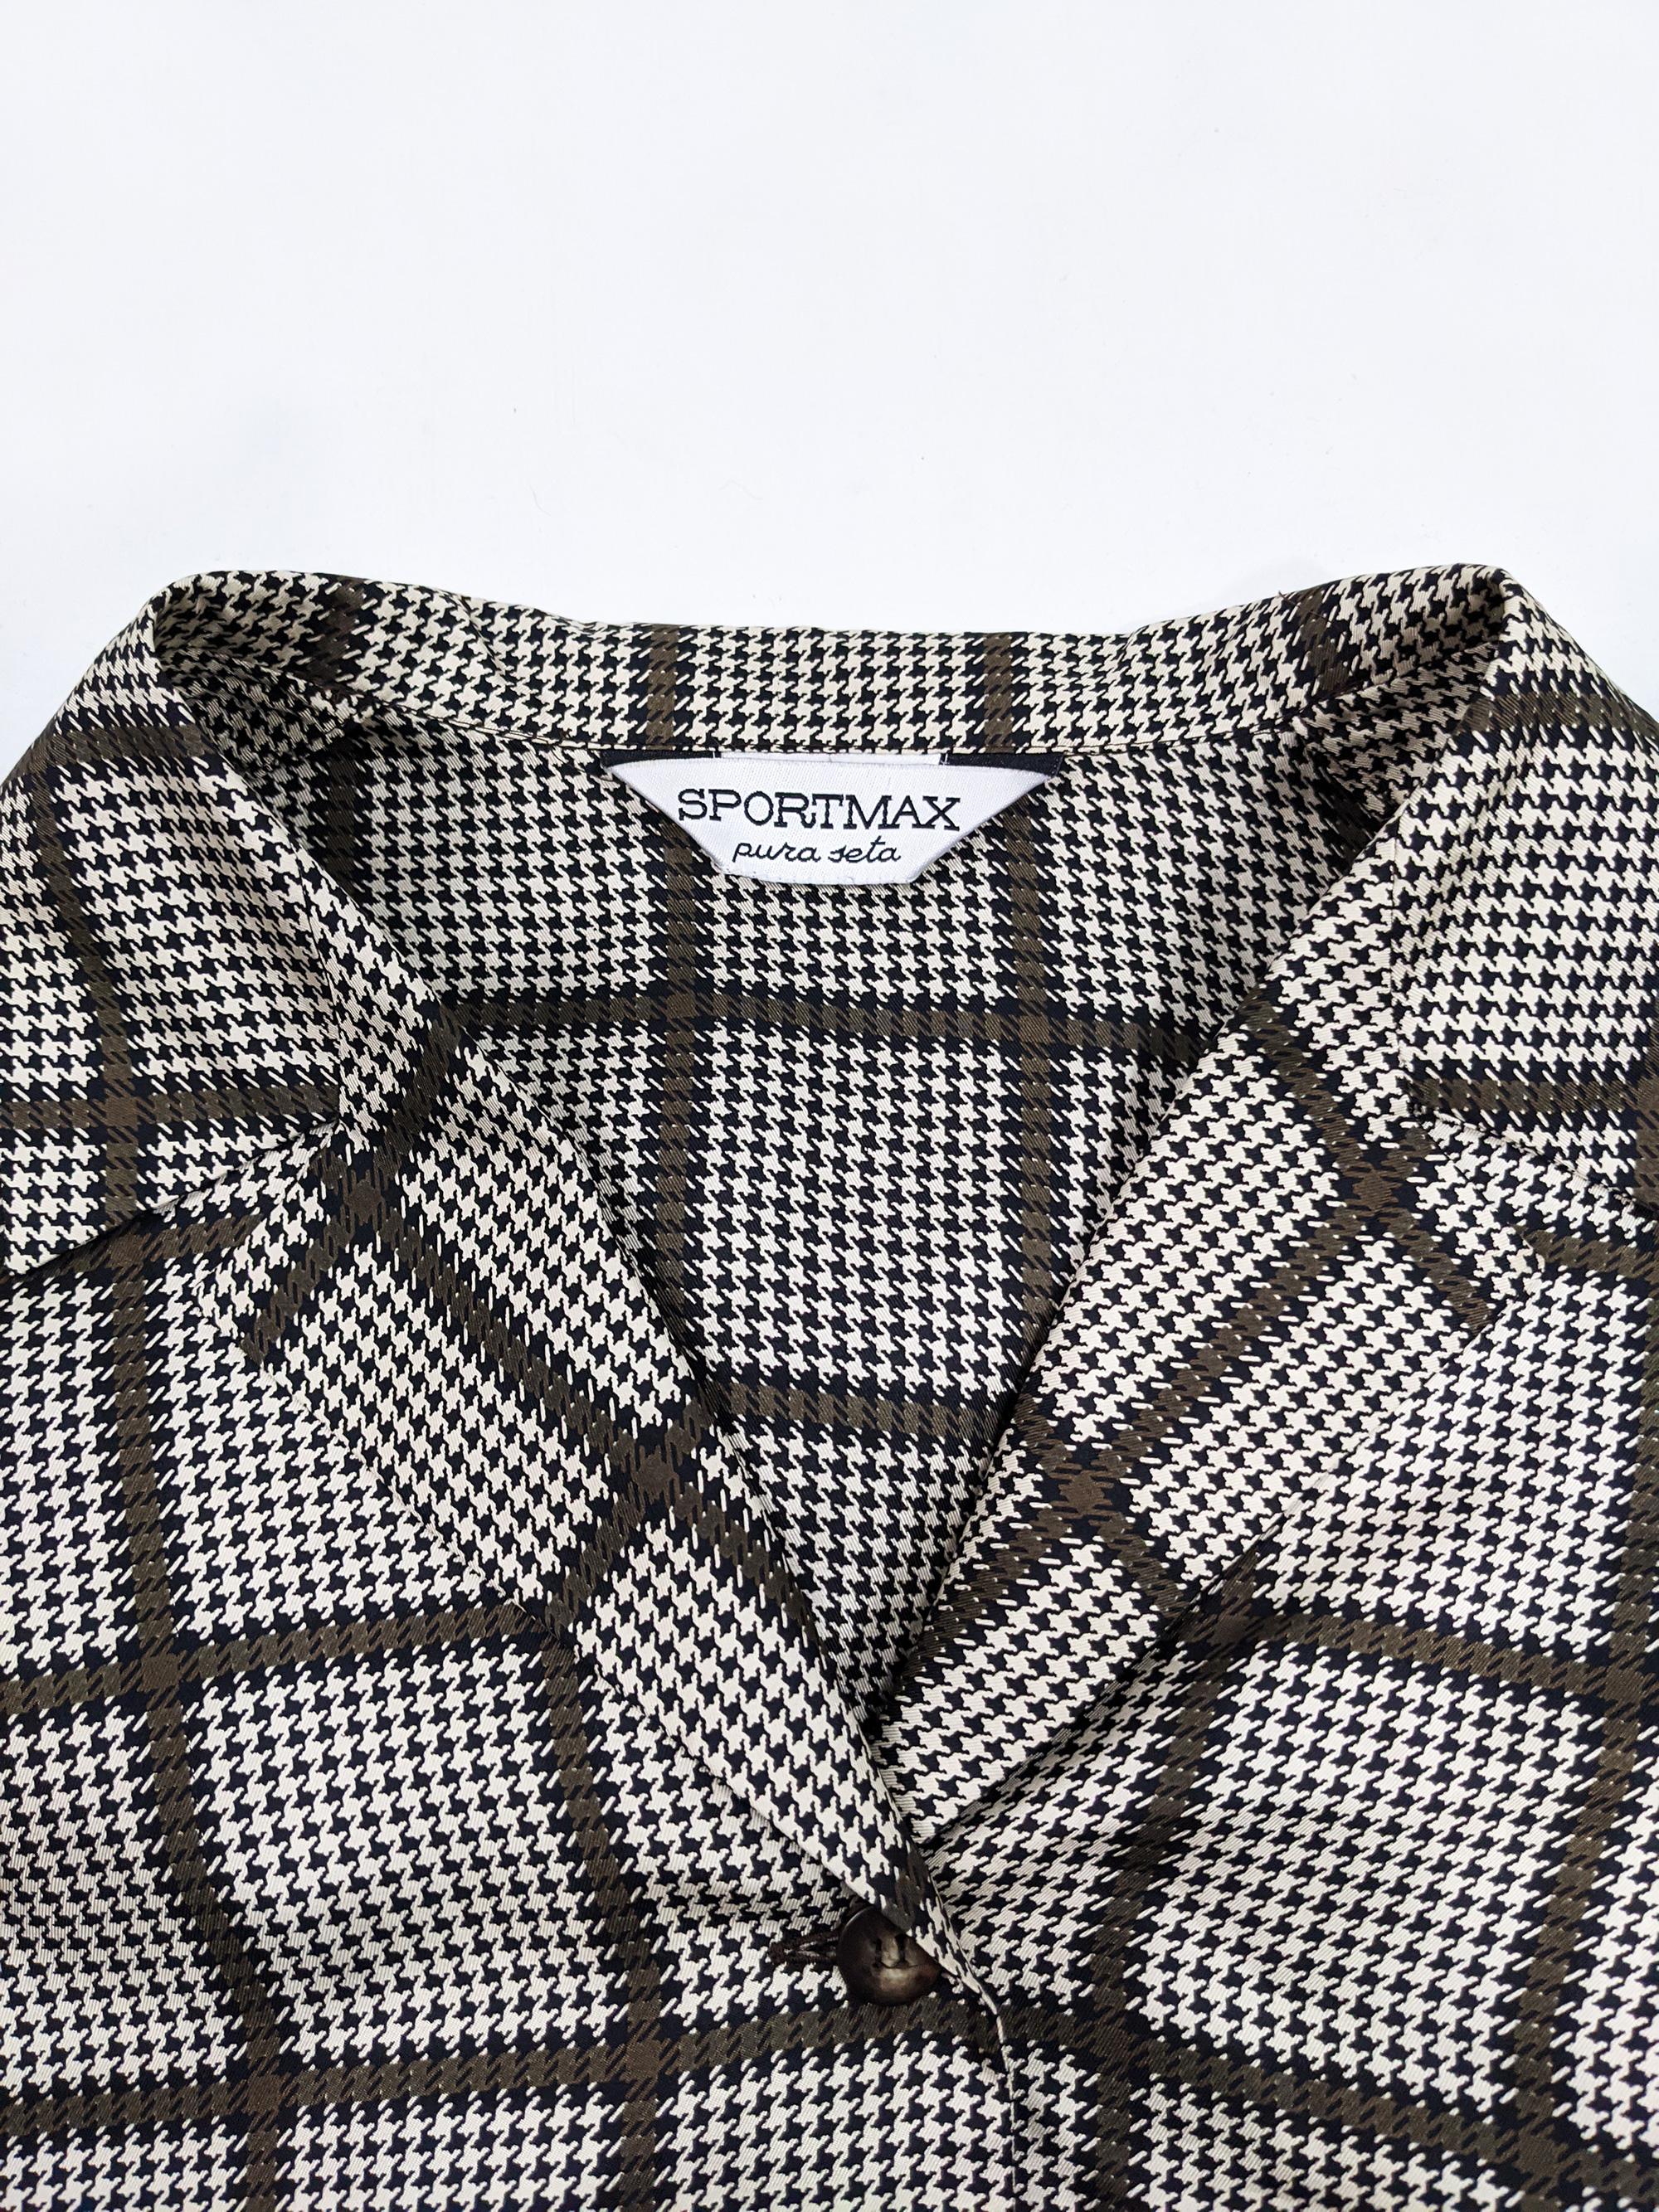 Sportmax Vintage Pure Silk Checked Blouse, 1990s For Sale 1